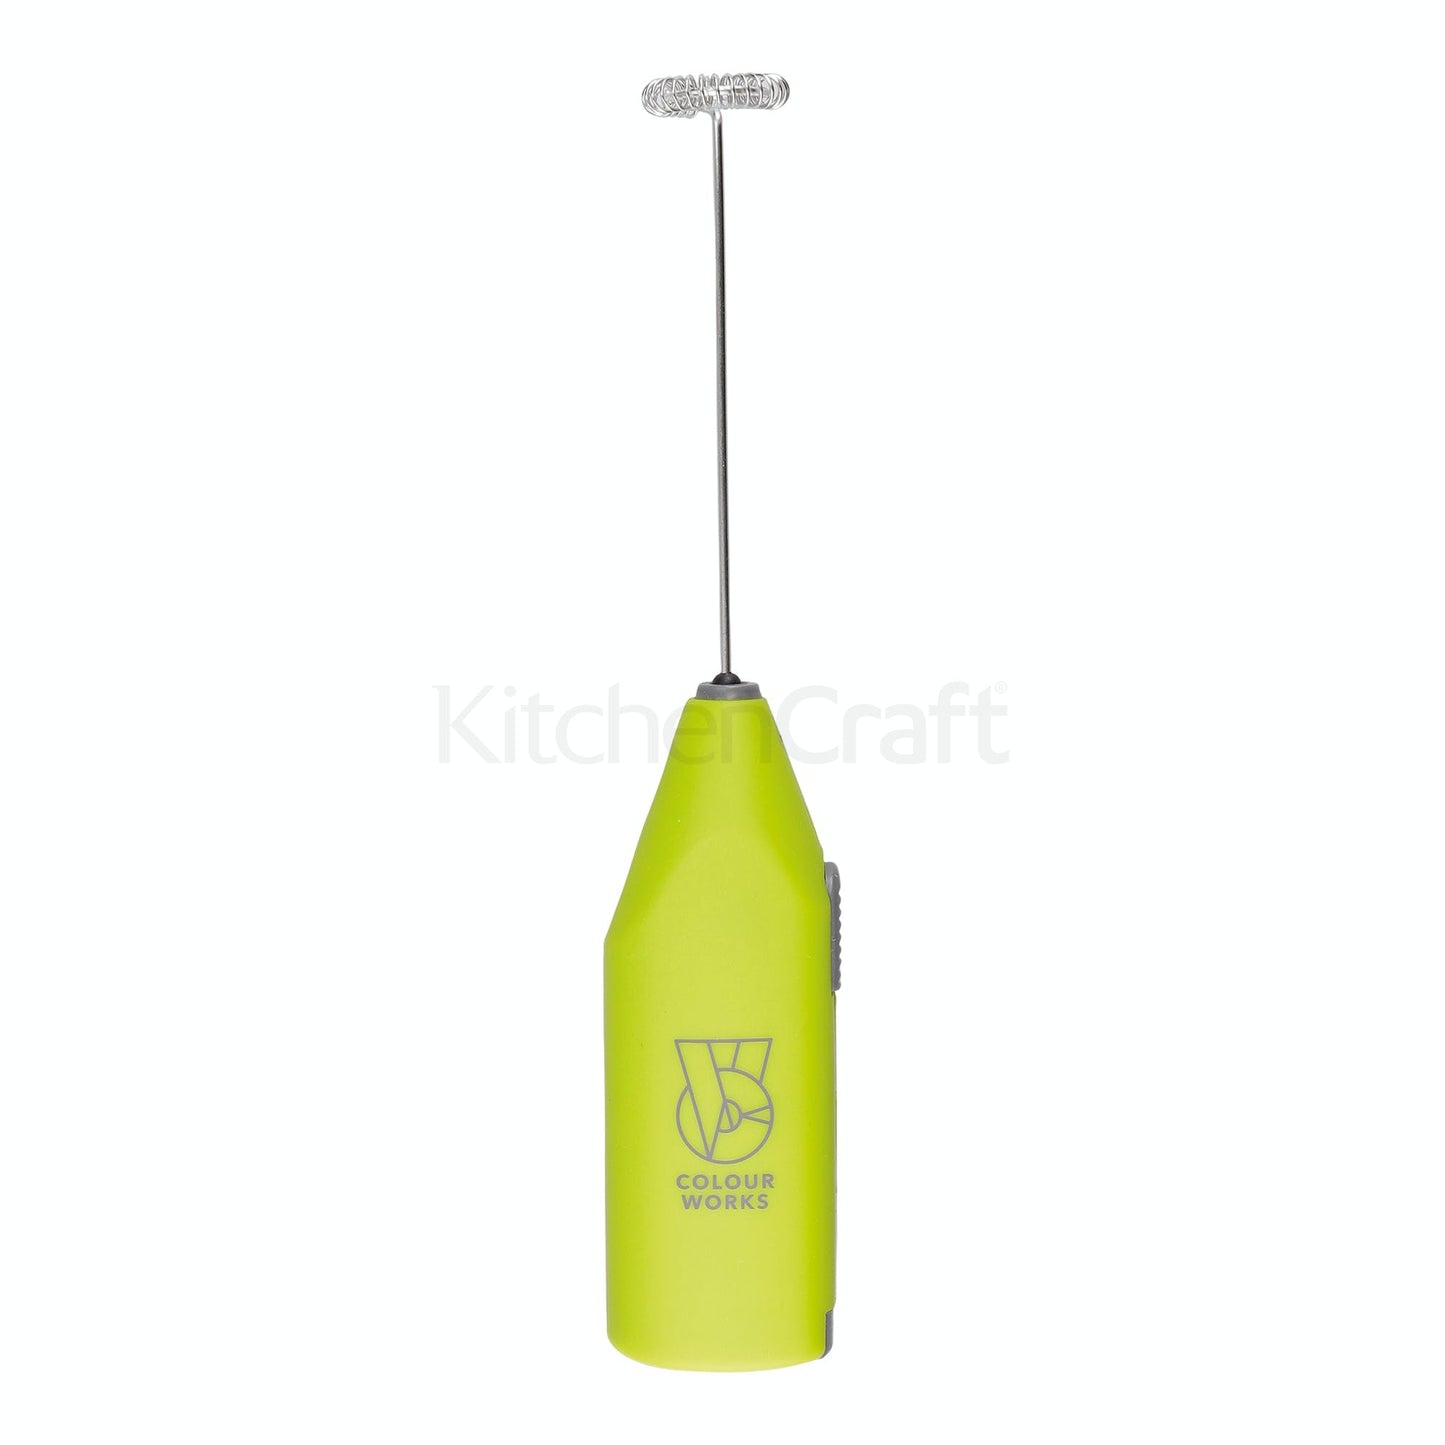 KitchenCraft Colourworks Display of 12 Electric Drink Frothers CWFROTHDISP12